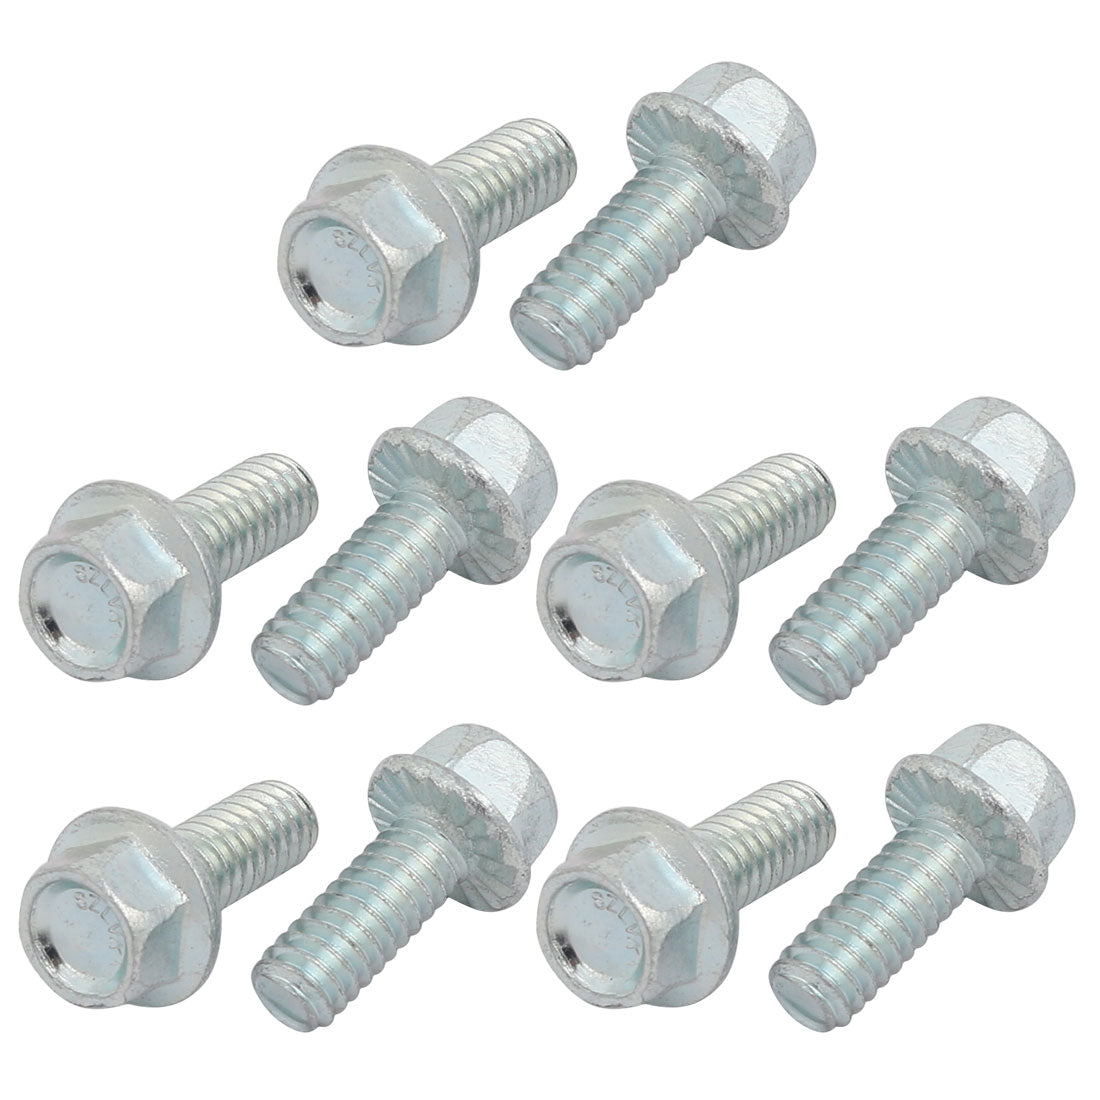 uxcell Uxcell 10Pcs 1/4-20 x 5/8 Inch Thread Carbon Steel Hex Serrated Head Flange Screw Bolt